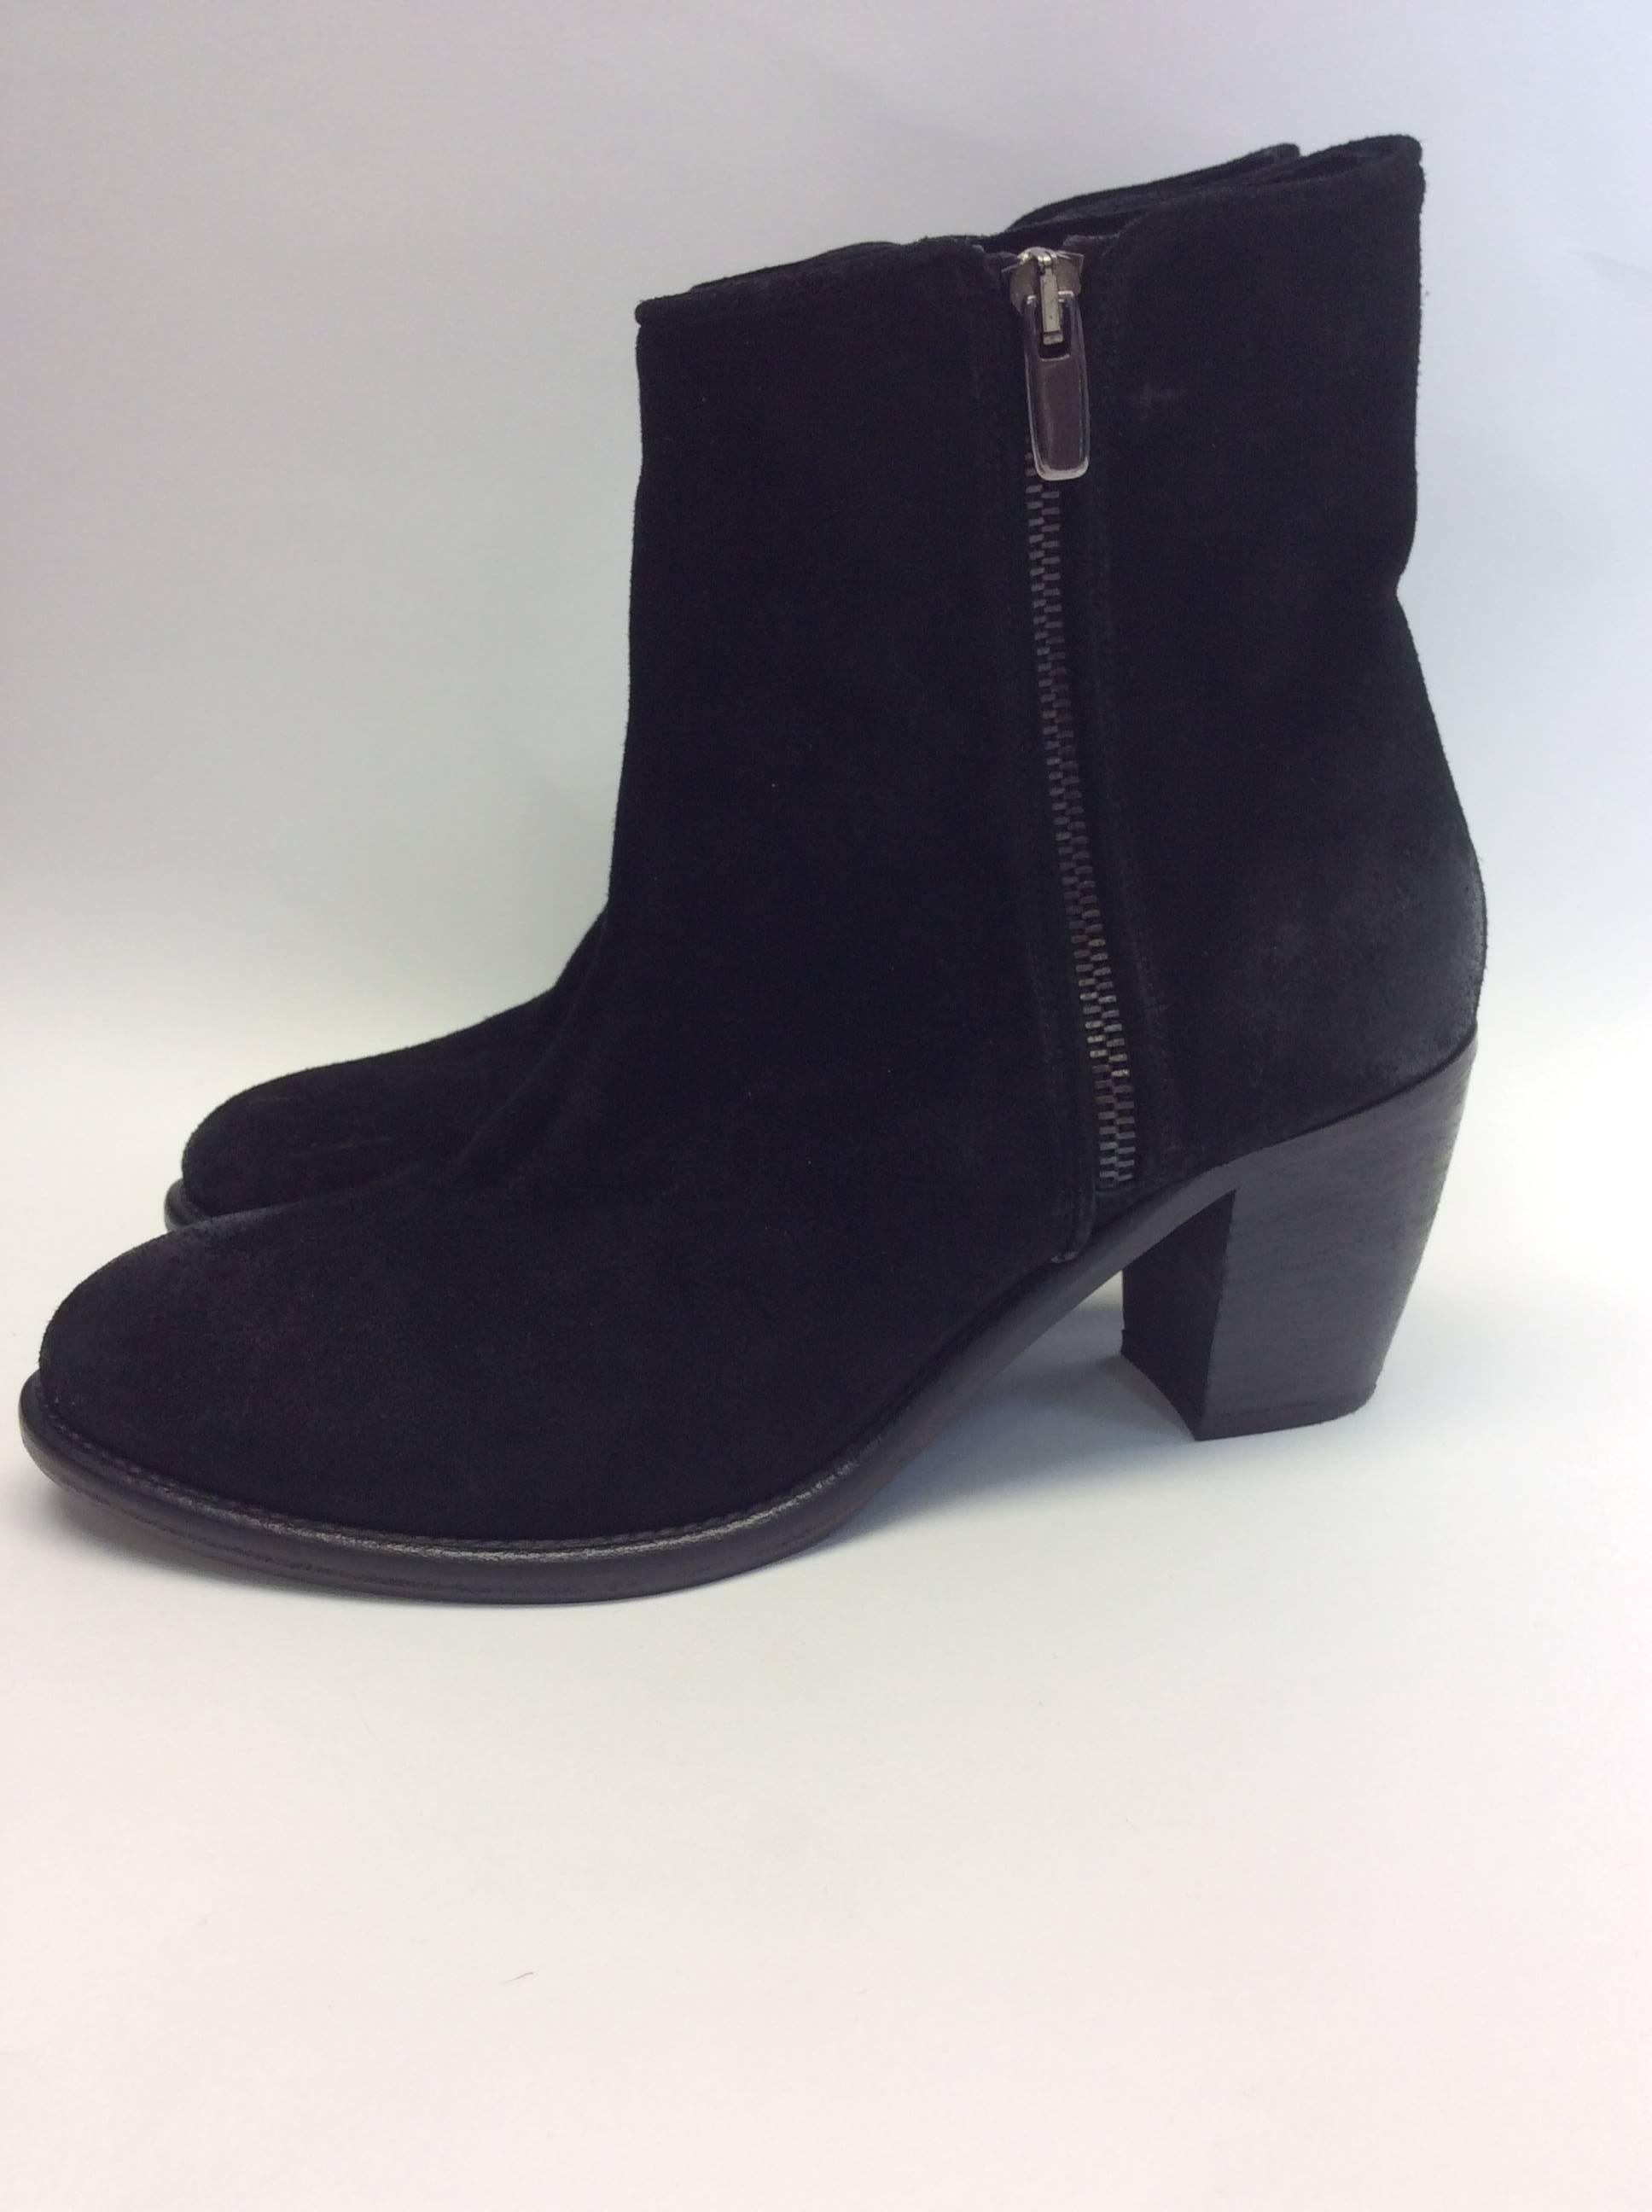 Barney's  Black Suede Ankle Booties
Size 39.5 
Made in Italy
$178
2.5 inch heel
9.5 inches from heel to top of boot